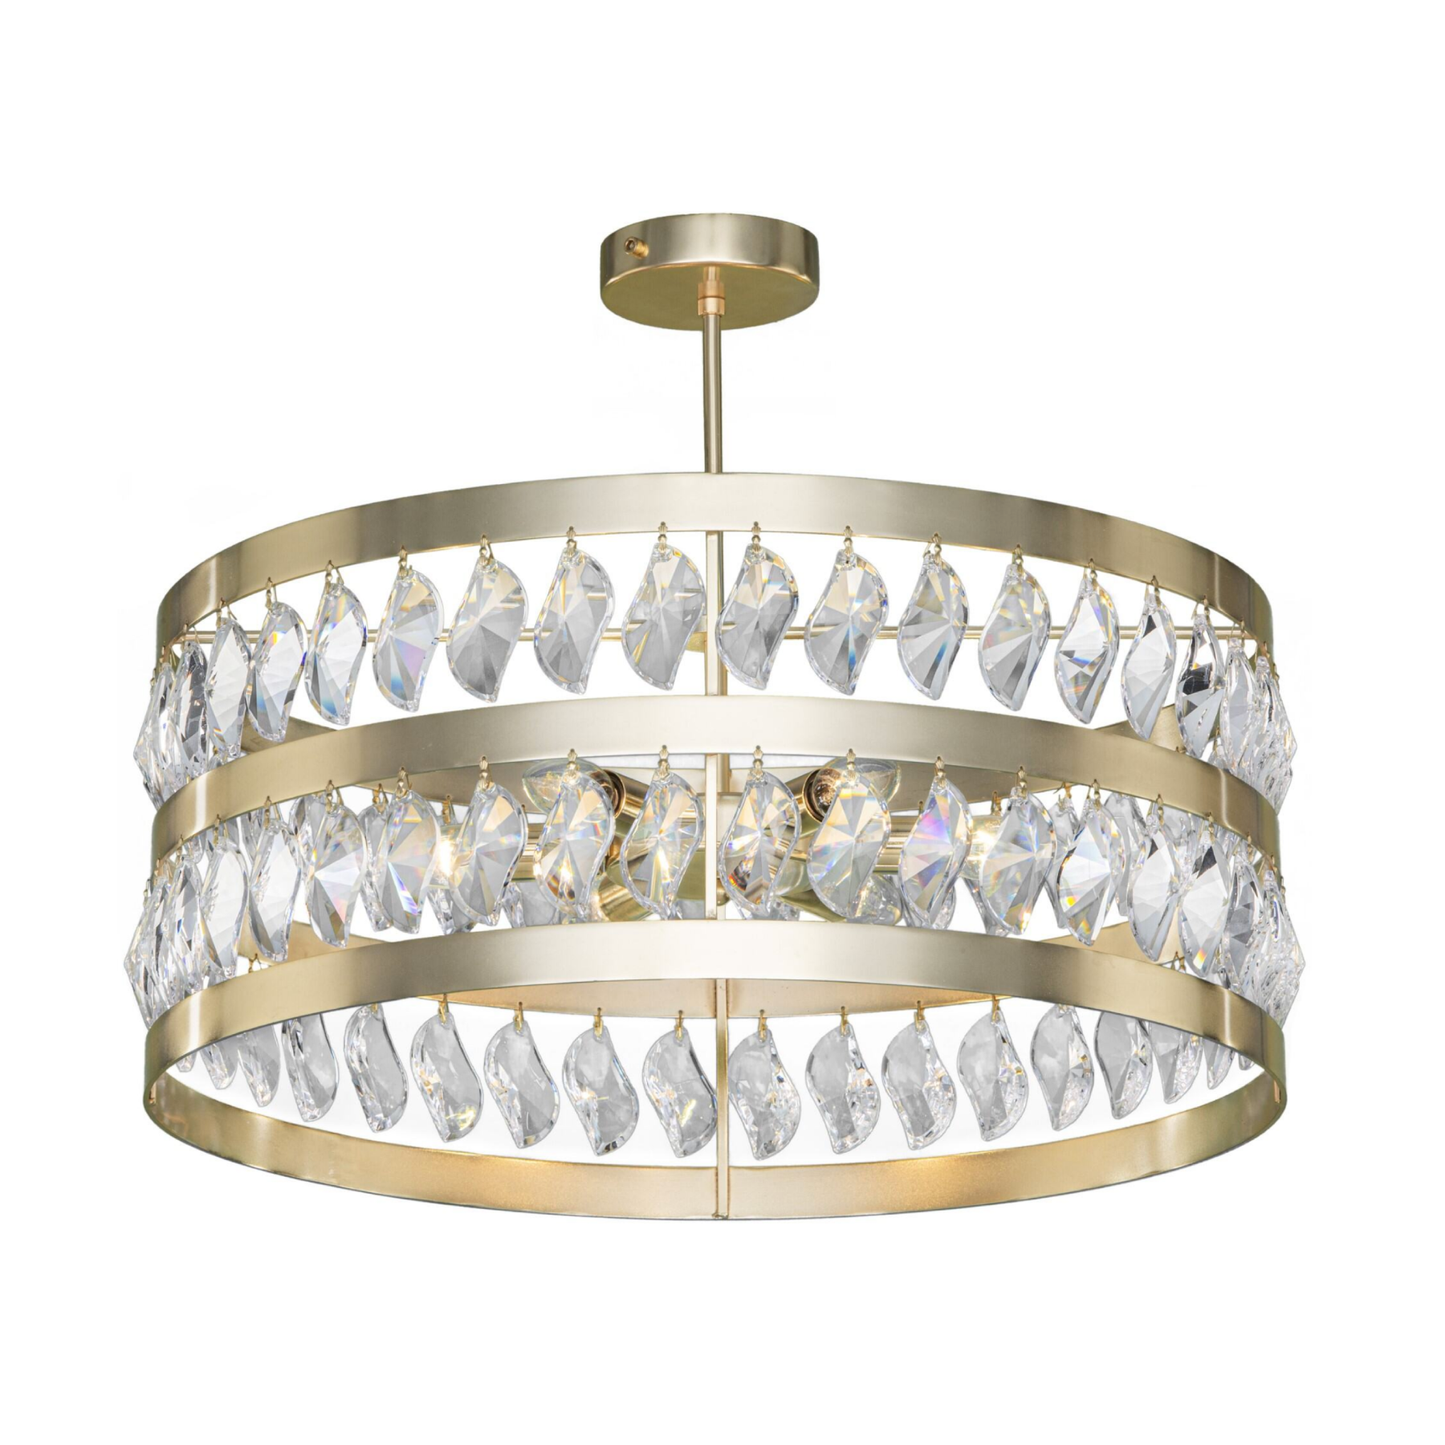 Tiara 6-Light Chandelier by Asfour®